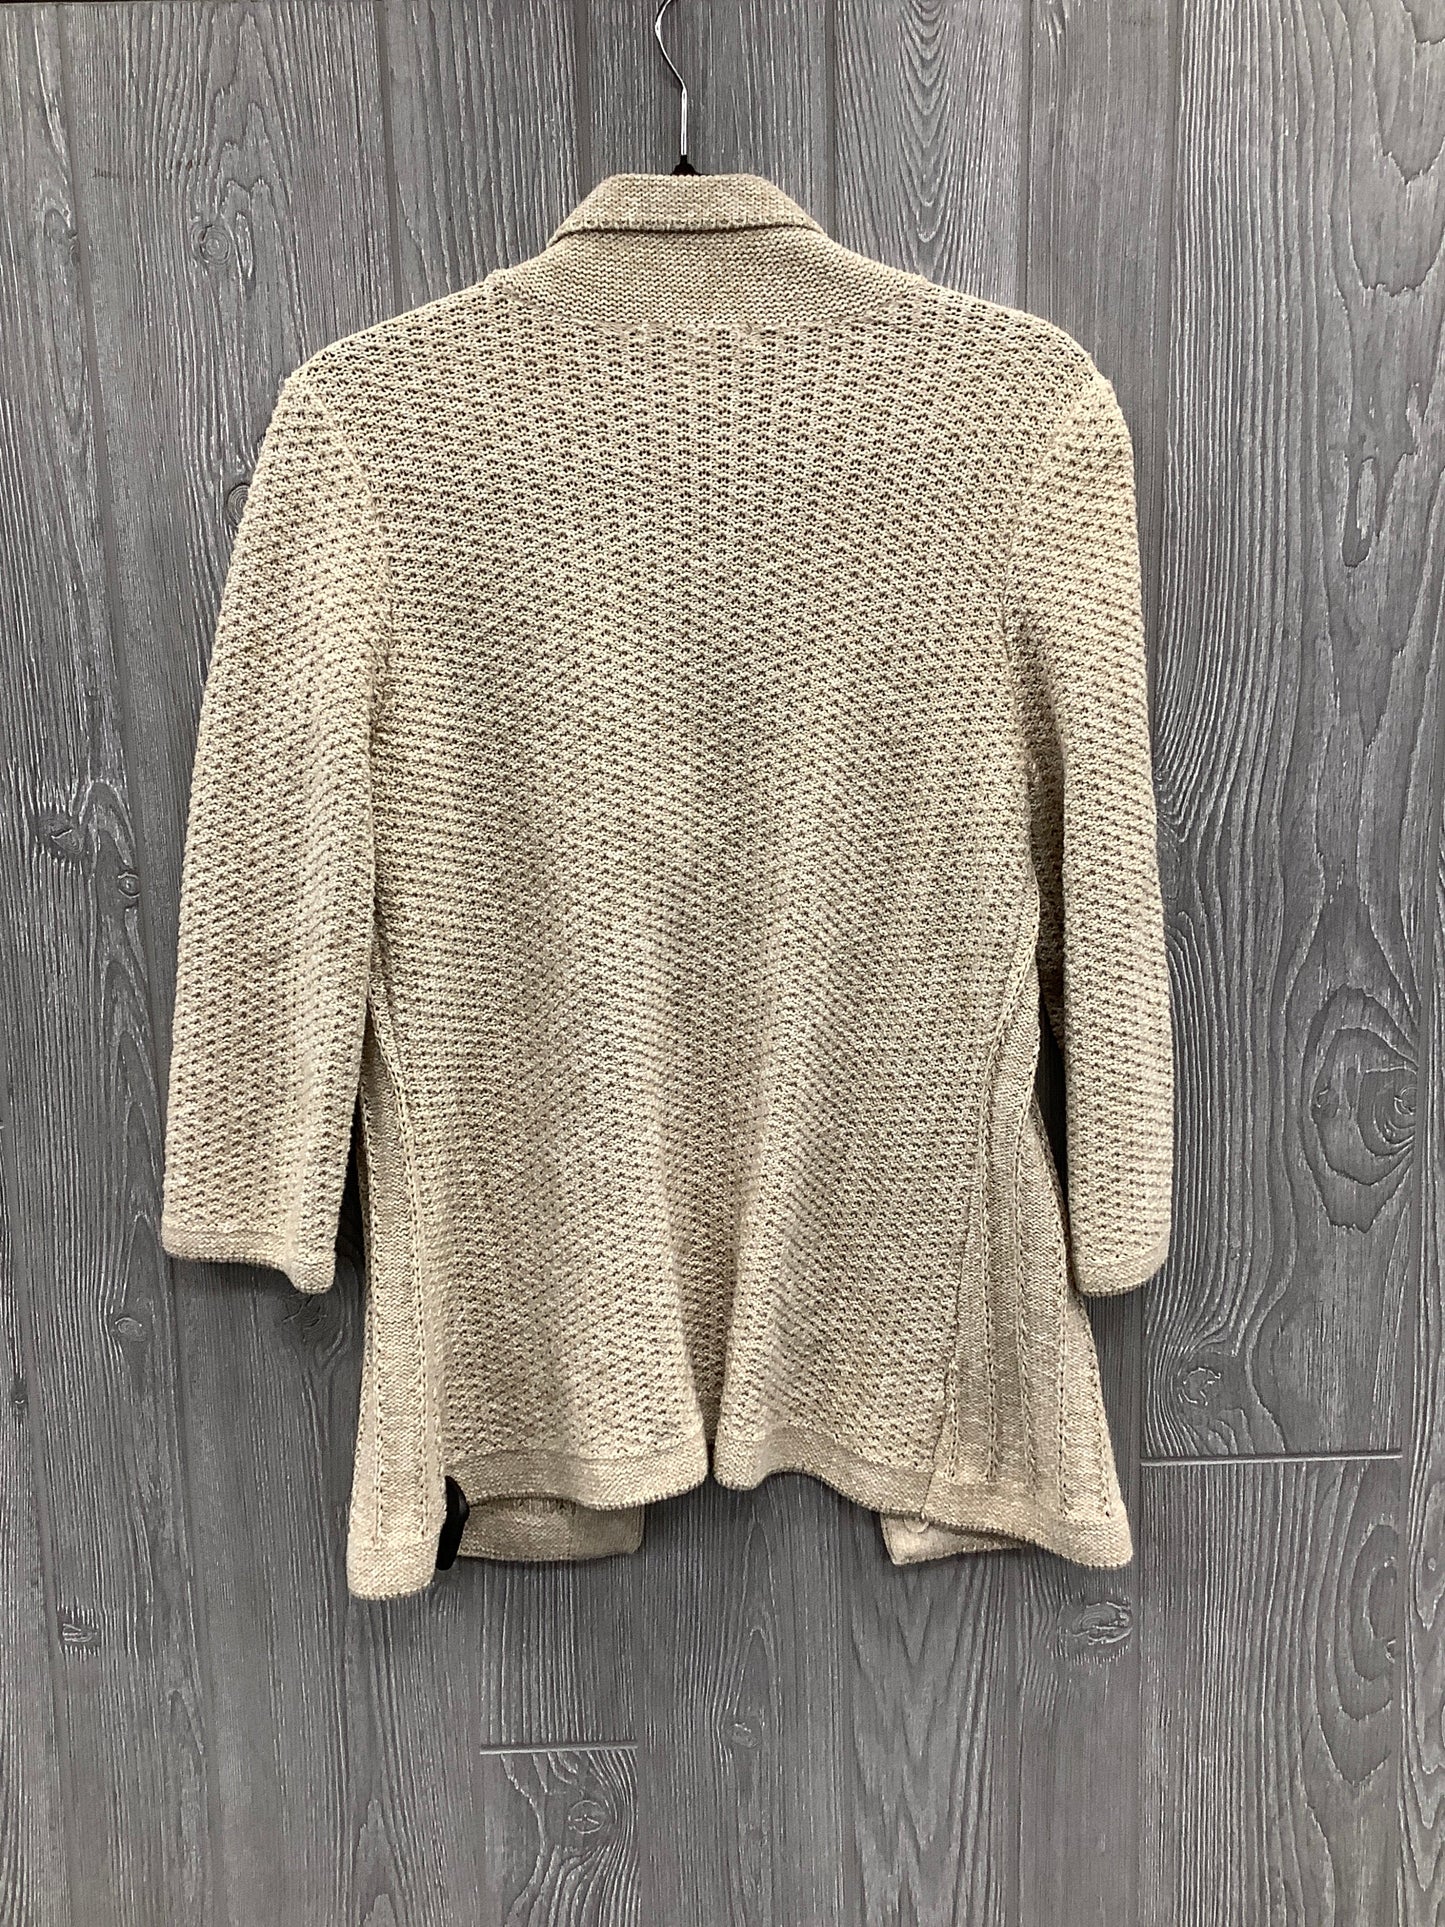 Sweater Cardigan By Christopher And Banks  Size: M